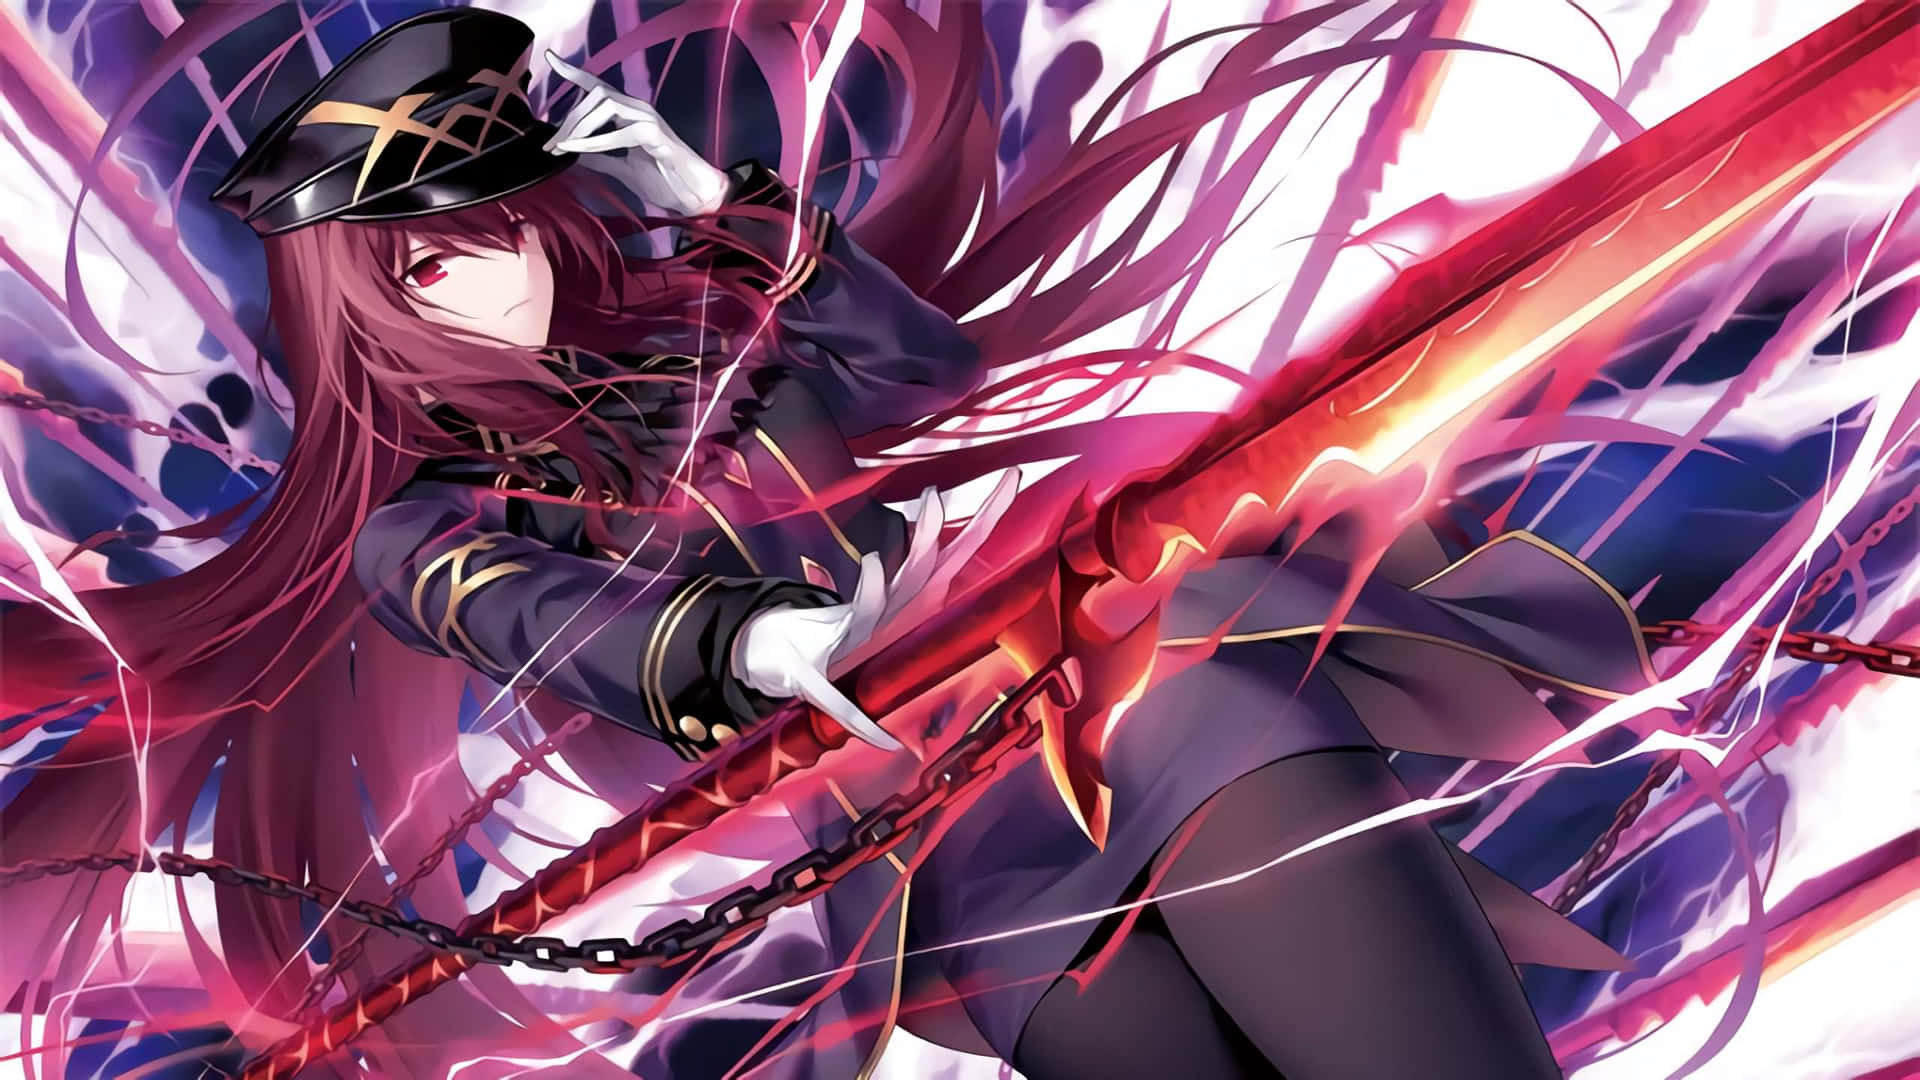 Download Majestic Image Of Scathach Skadi From Fate Grand Order ...